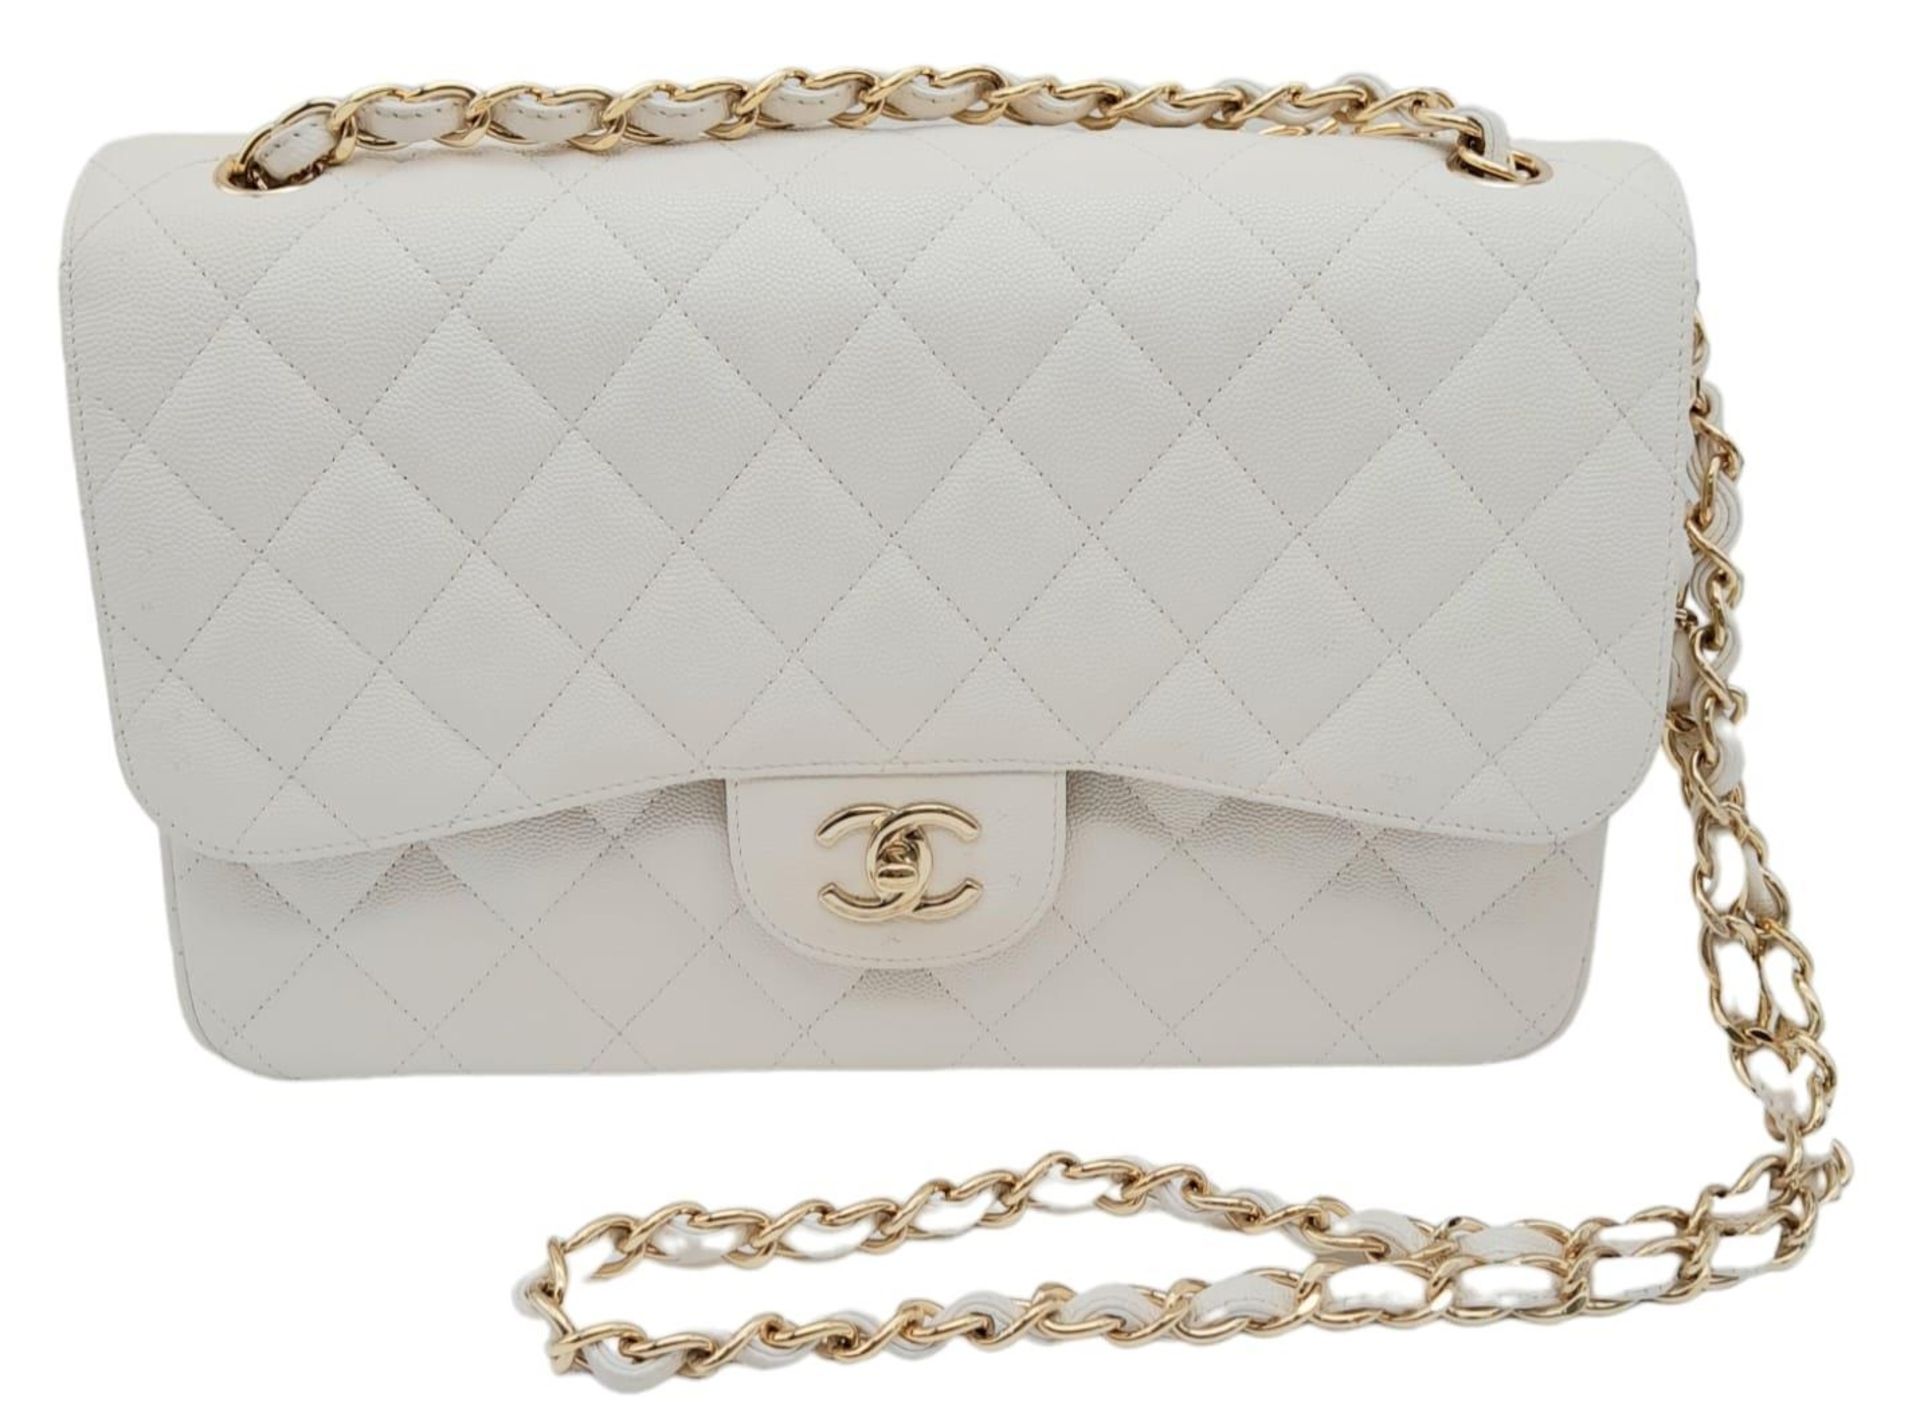 Chanel Caviar Jumbo Single Flap Bag. Quilted white caviar leather stitched in diamond pattern. - Image 2 of 15